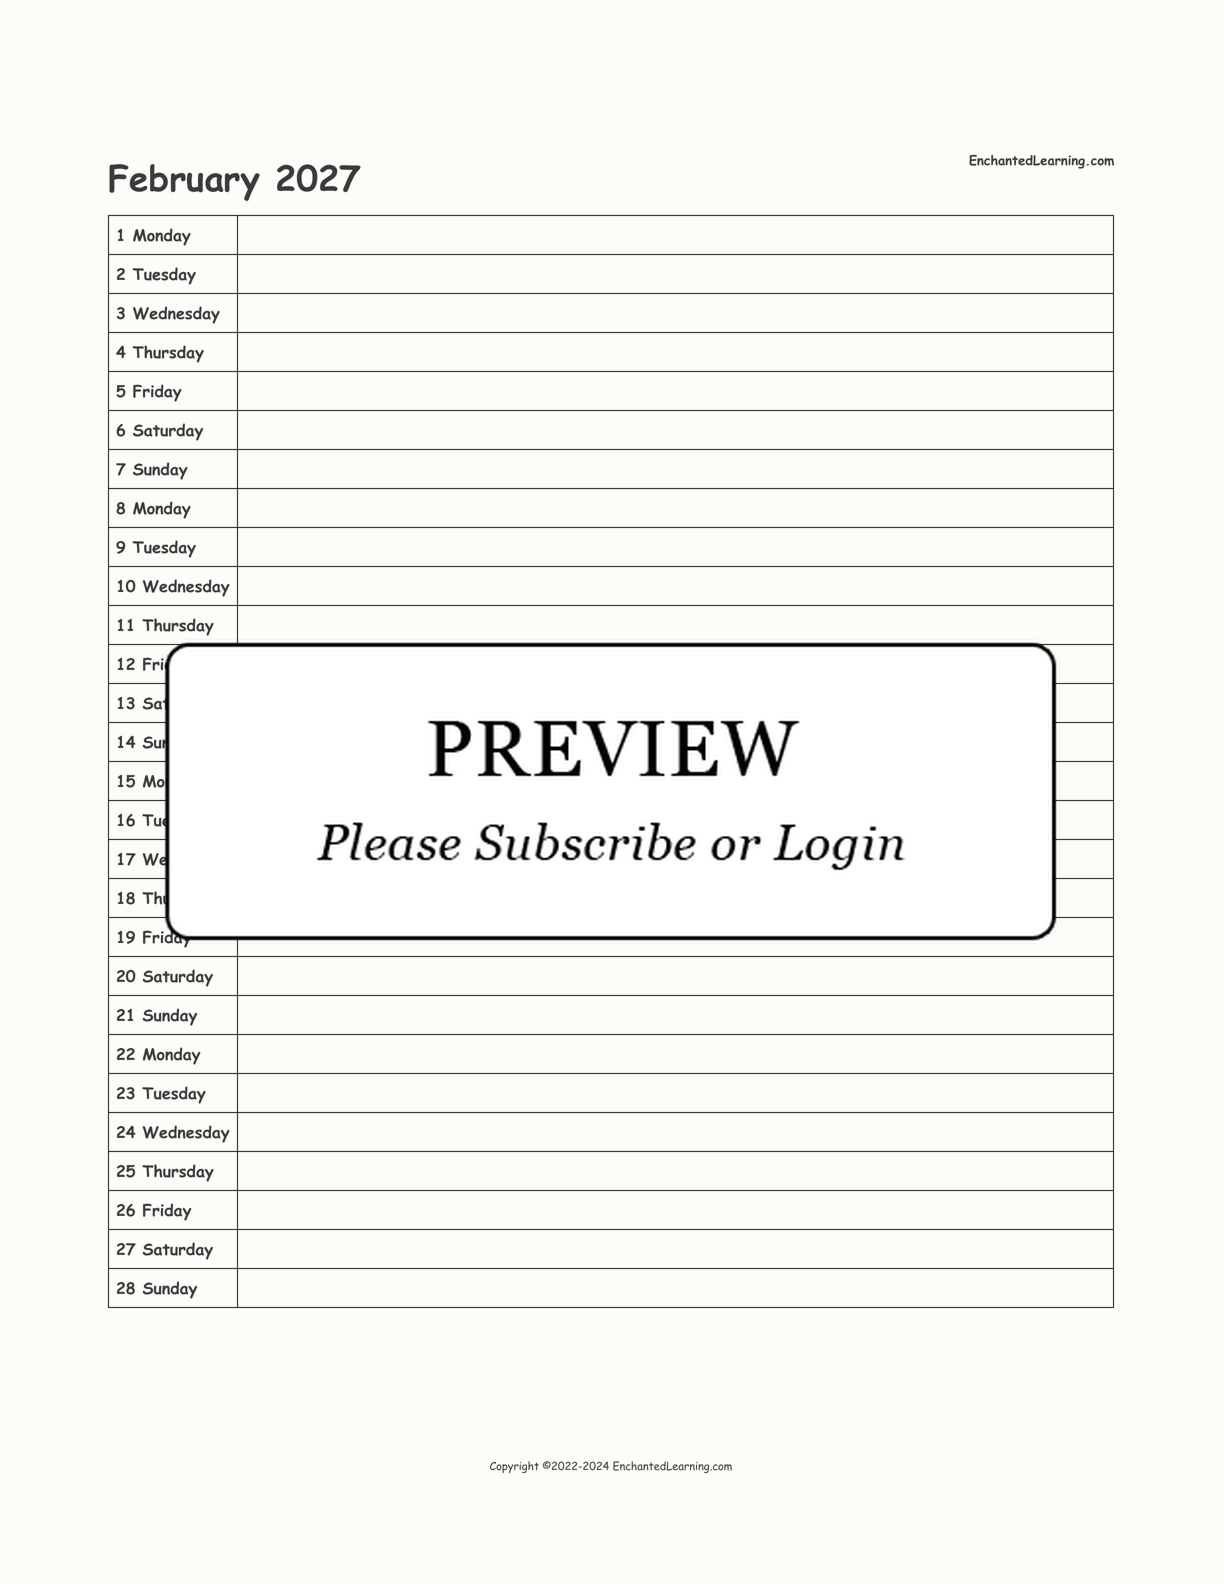 2027 Scheduling Calendar interactive printout page 2